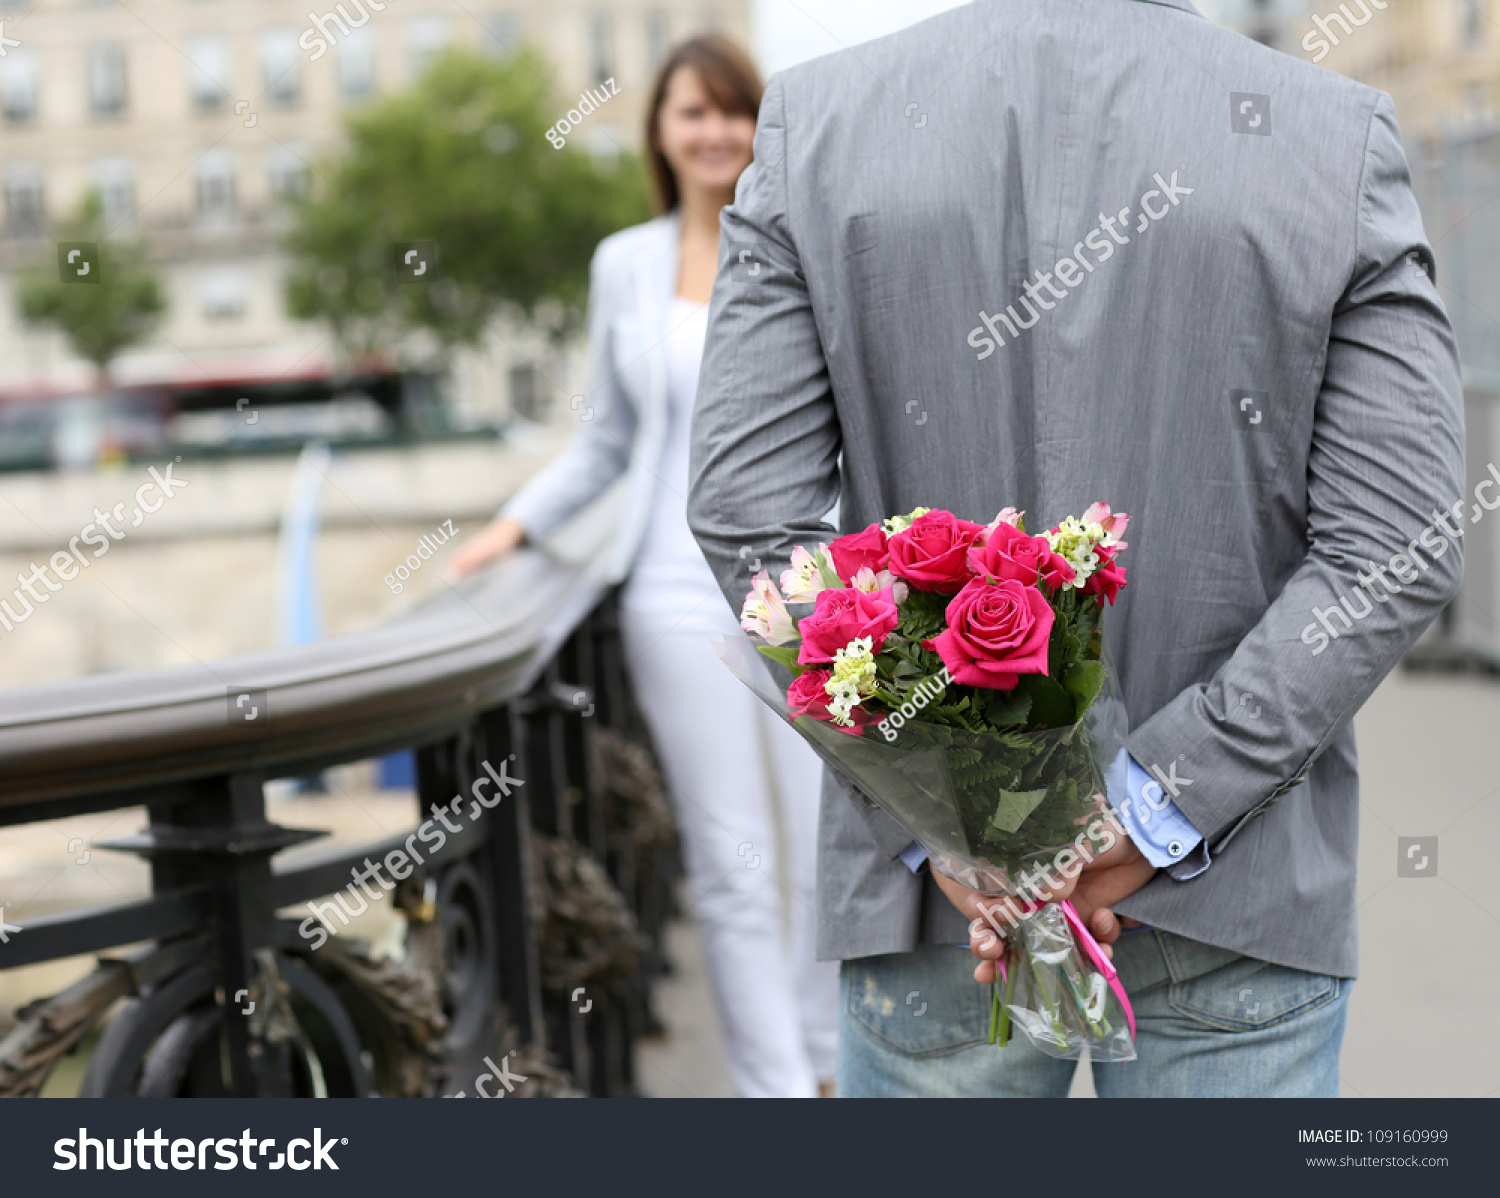 Give flowers stock image. Image of love